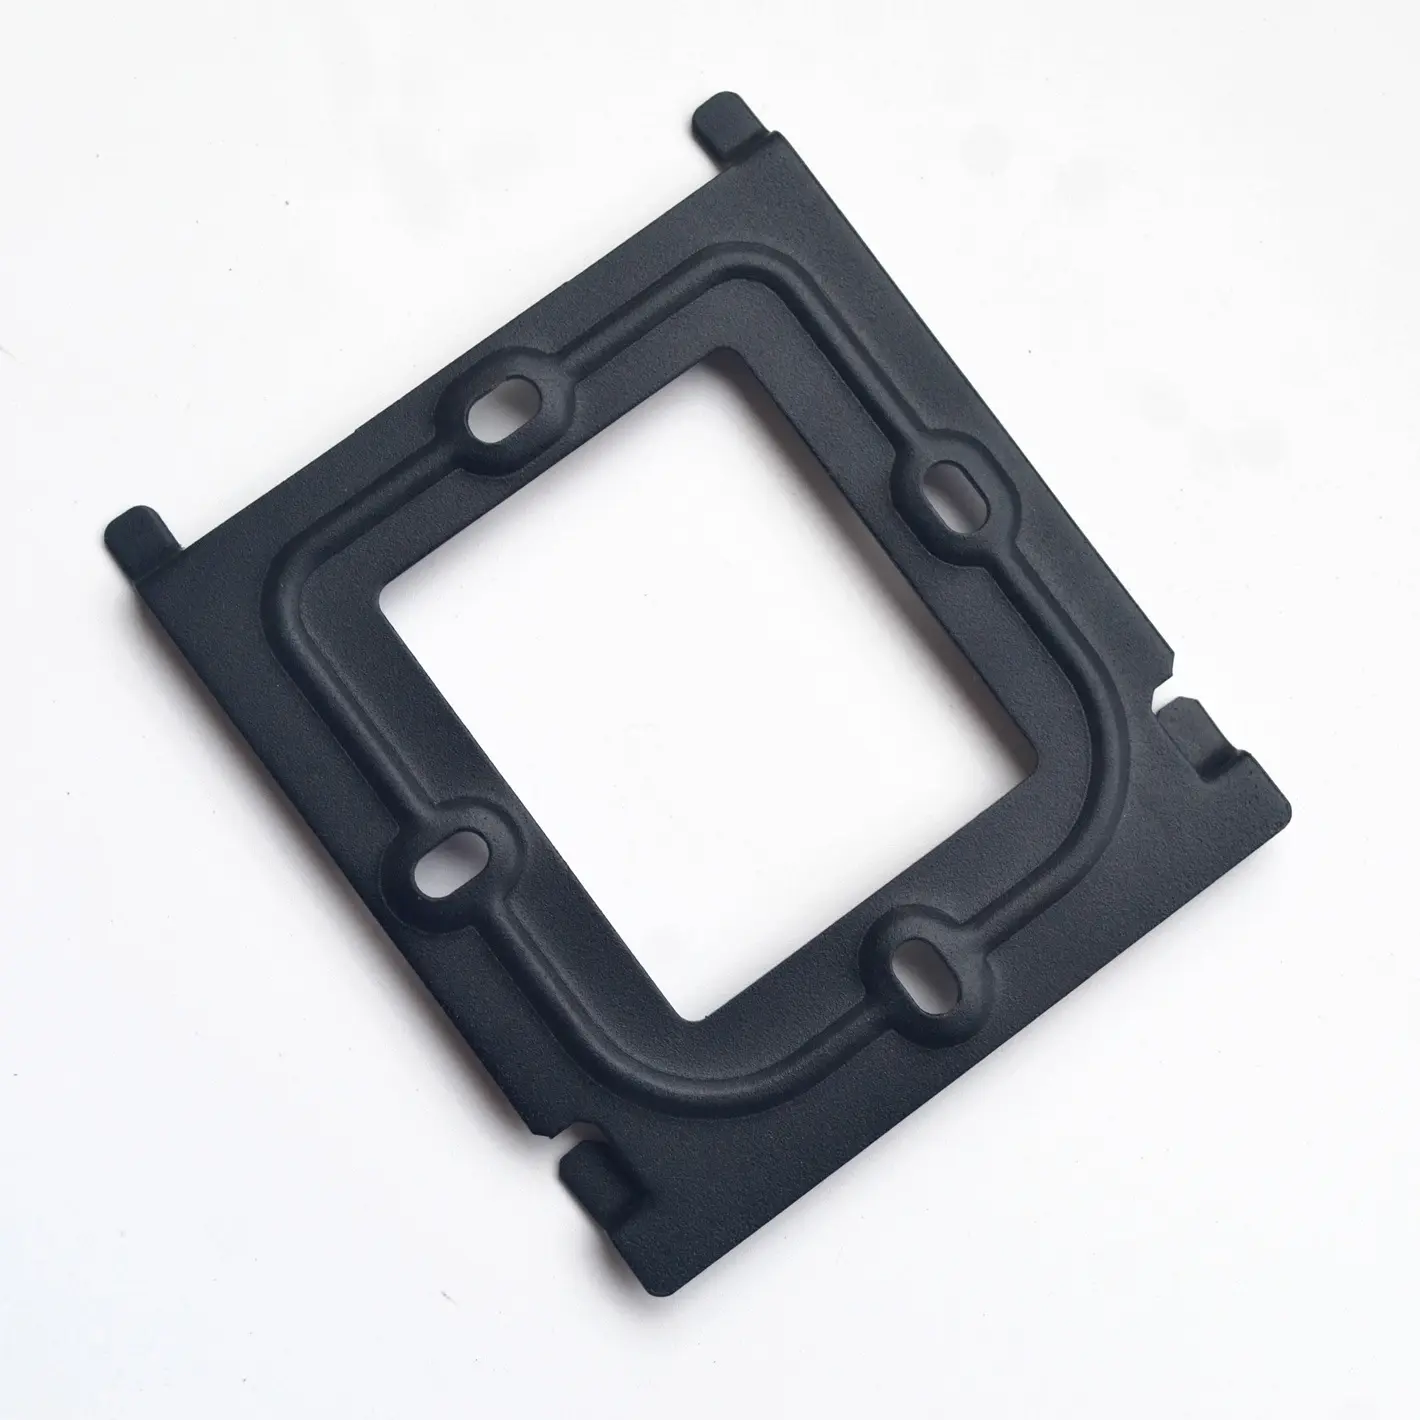 Manufacturer metal doorbell stamping accessories! Black part bracket stamping special for the hanging plate inside the doorbell